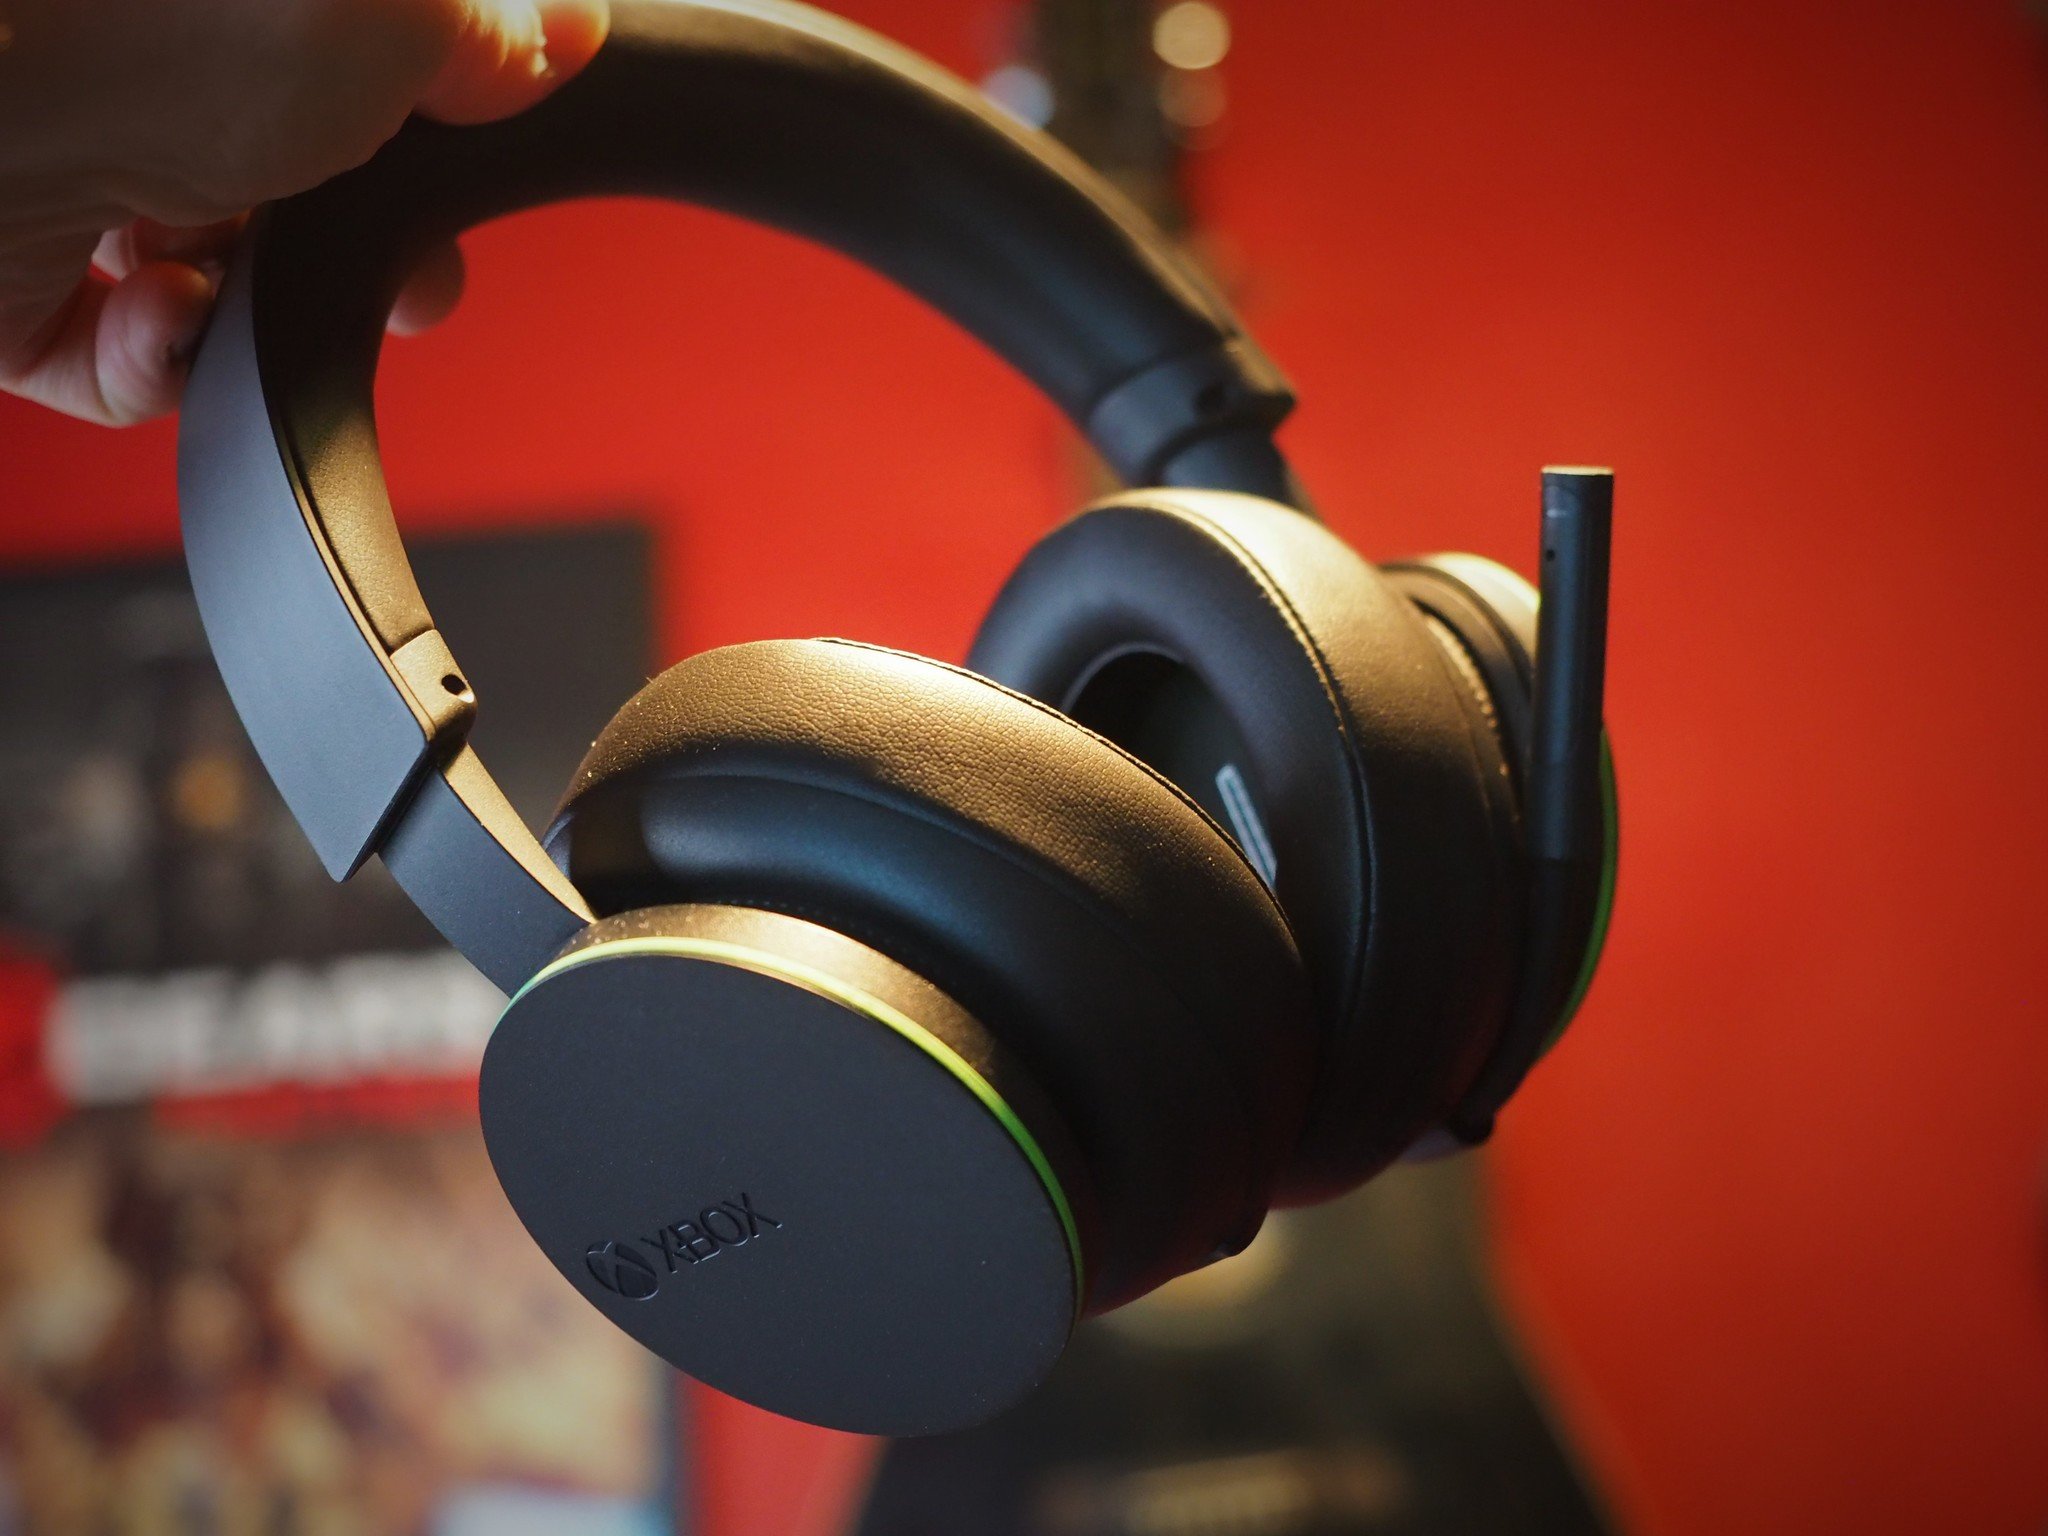 official-xbox-wireless-headset-review-shots_6.jpg